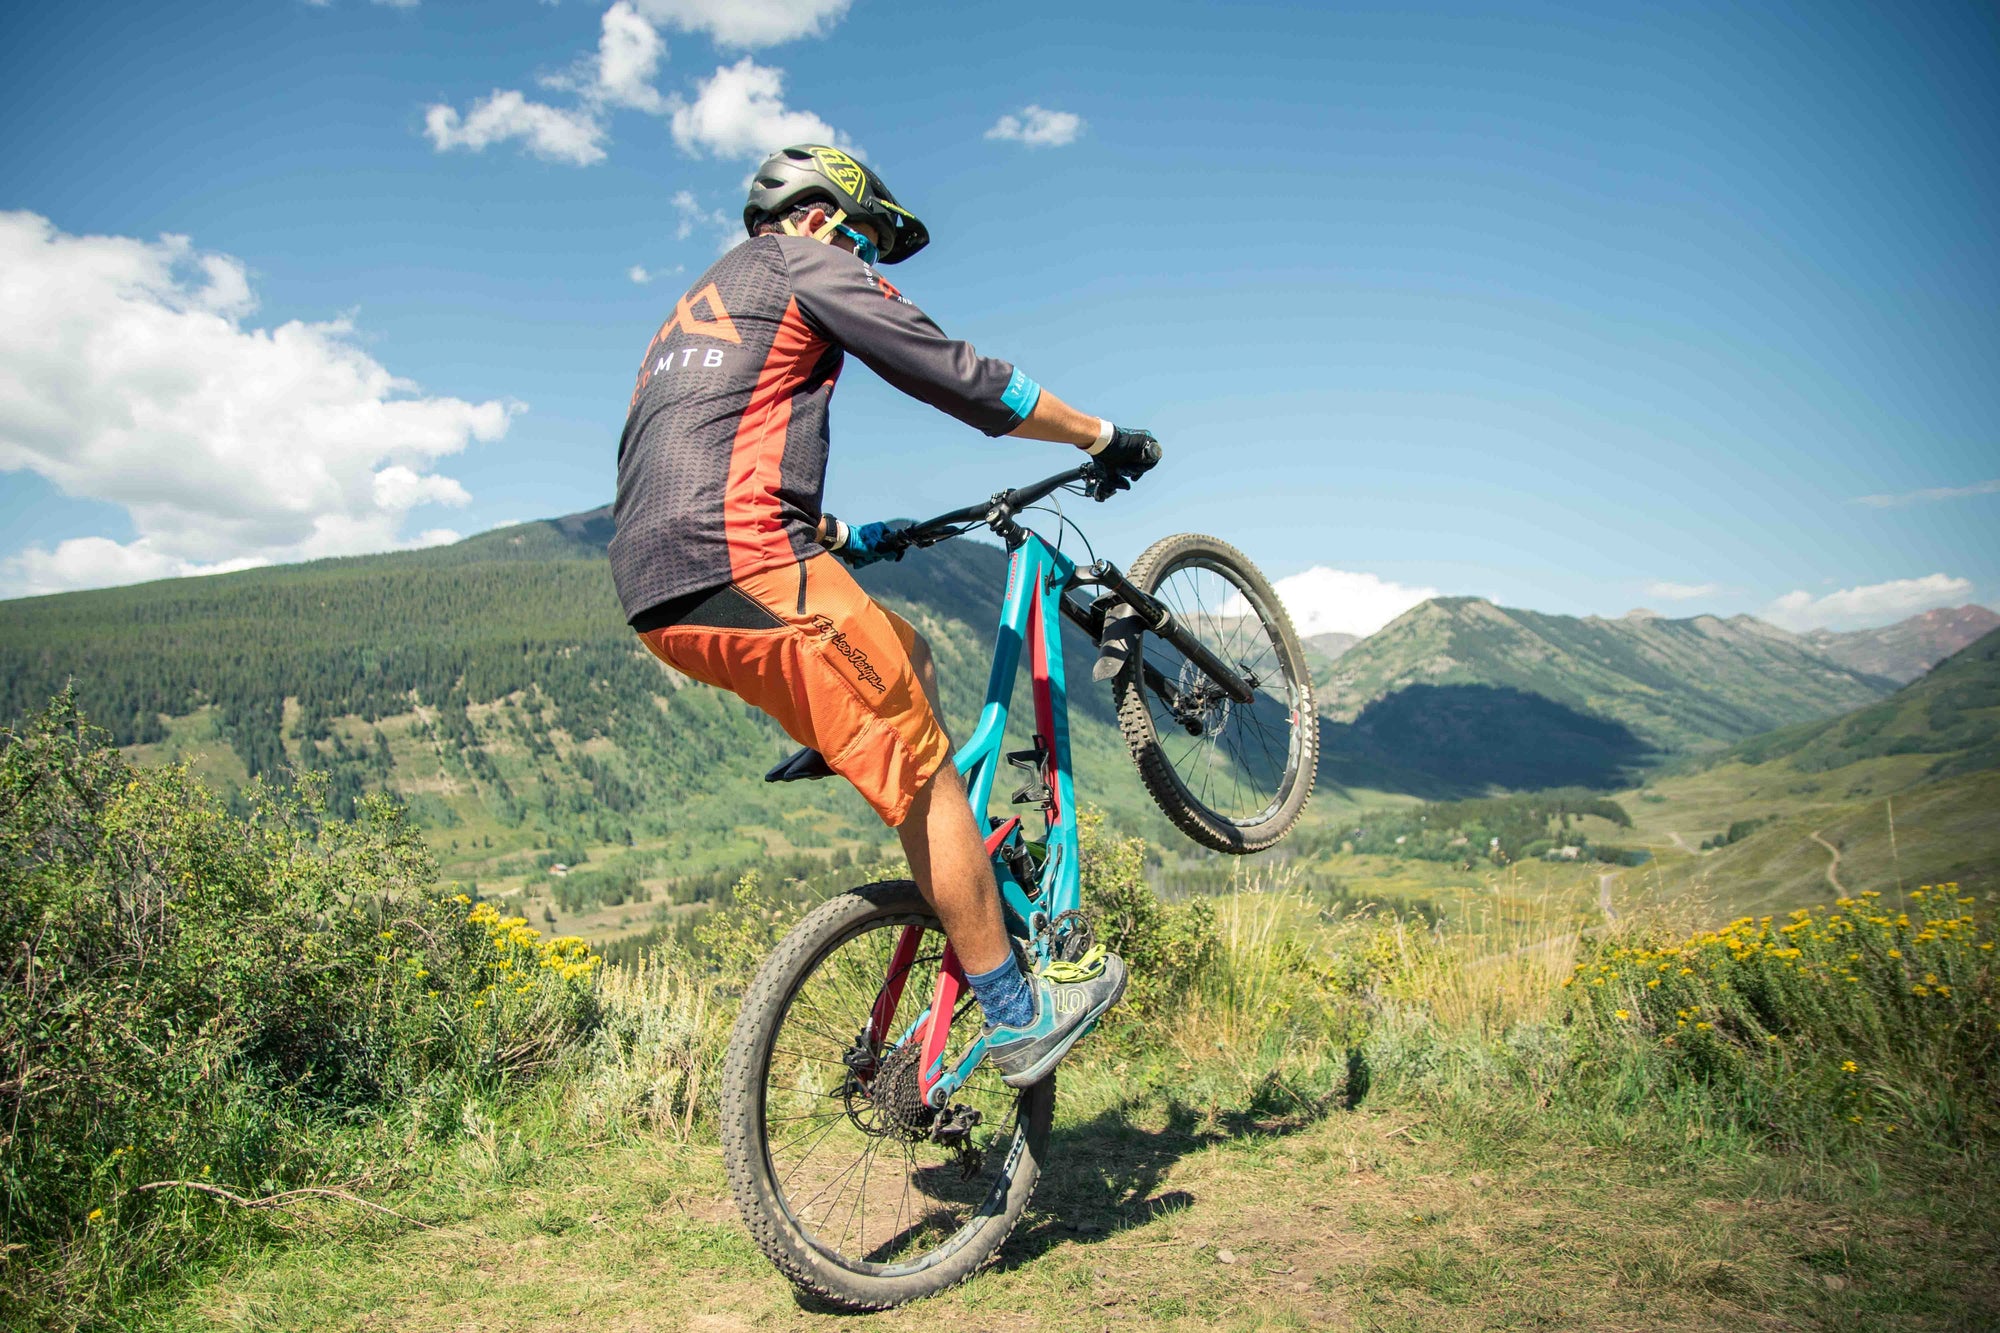 Outerbike - Summer in Crested Butte